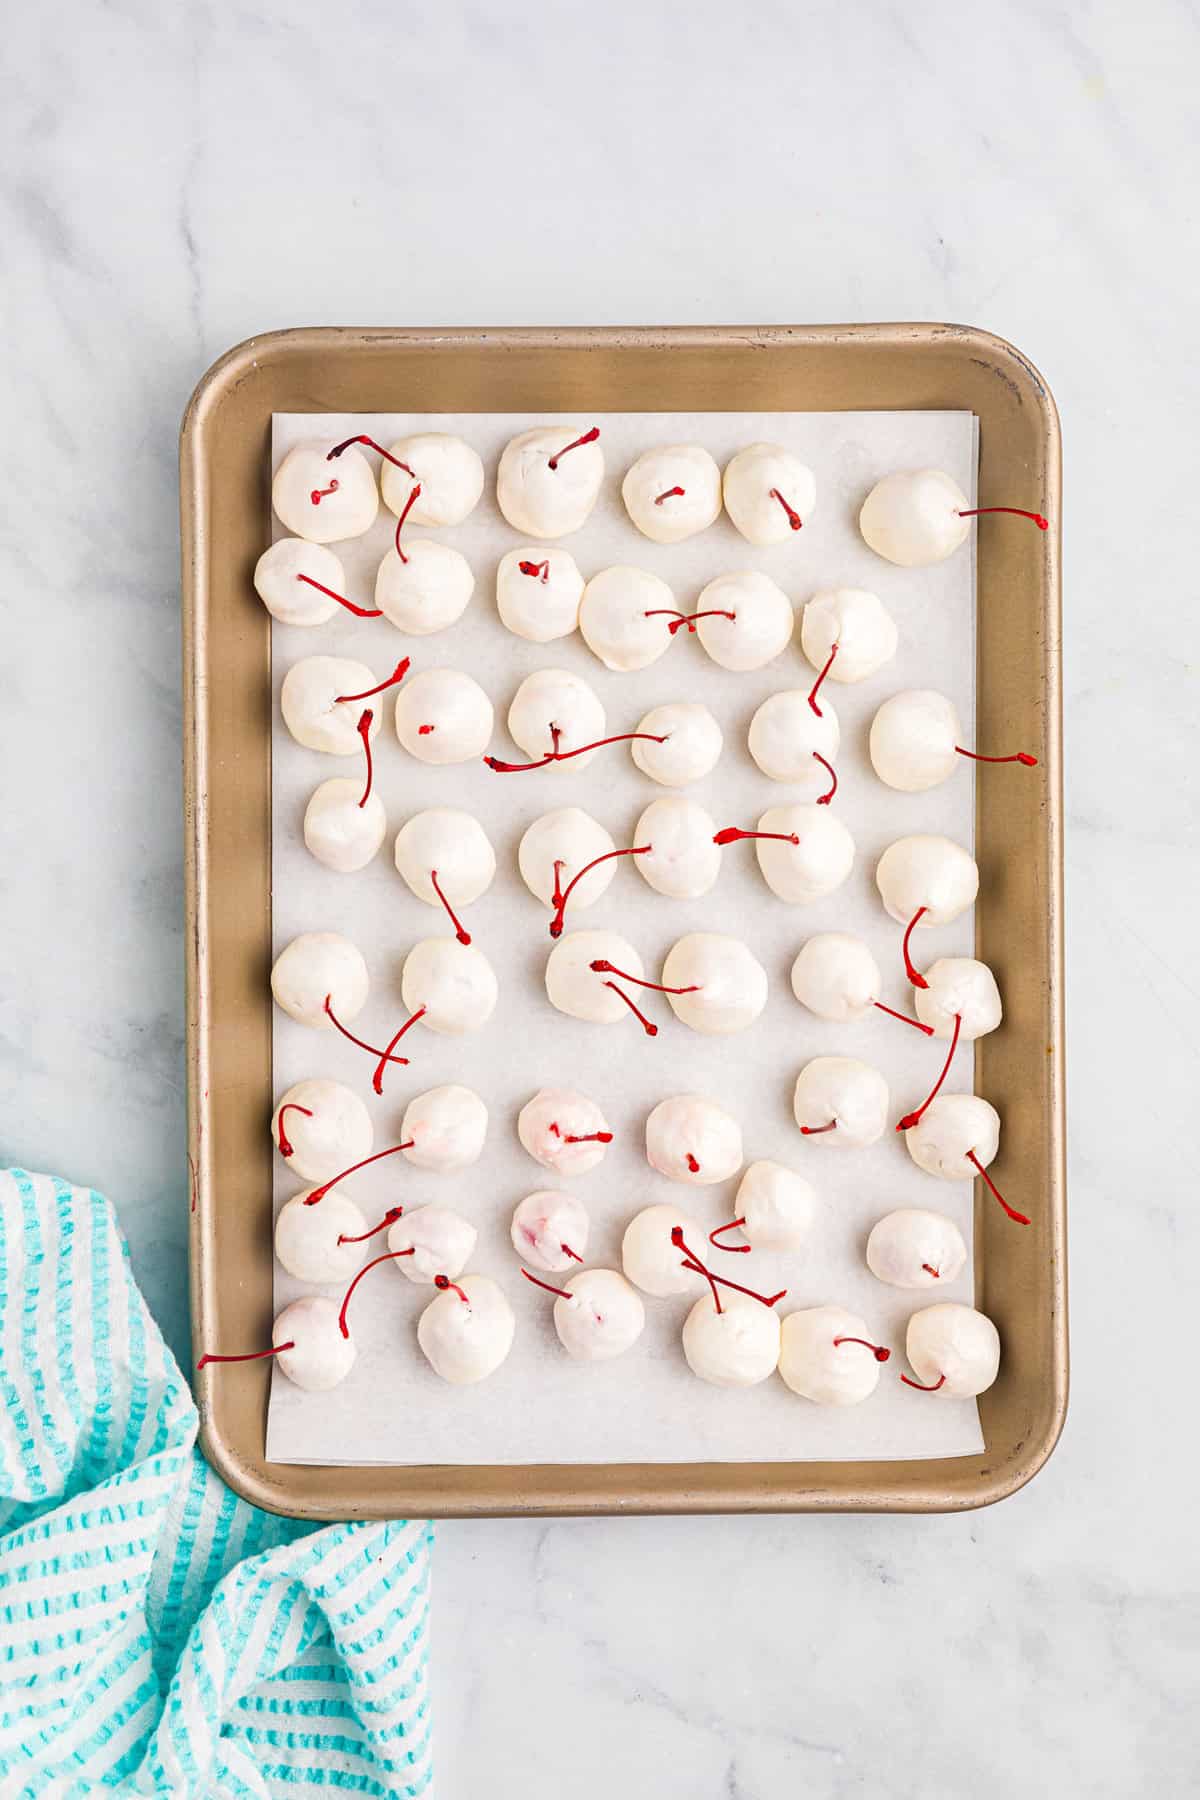 Covered cherries on parchment lined baking sheet for Chocolate Covered Cherries recipe